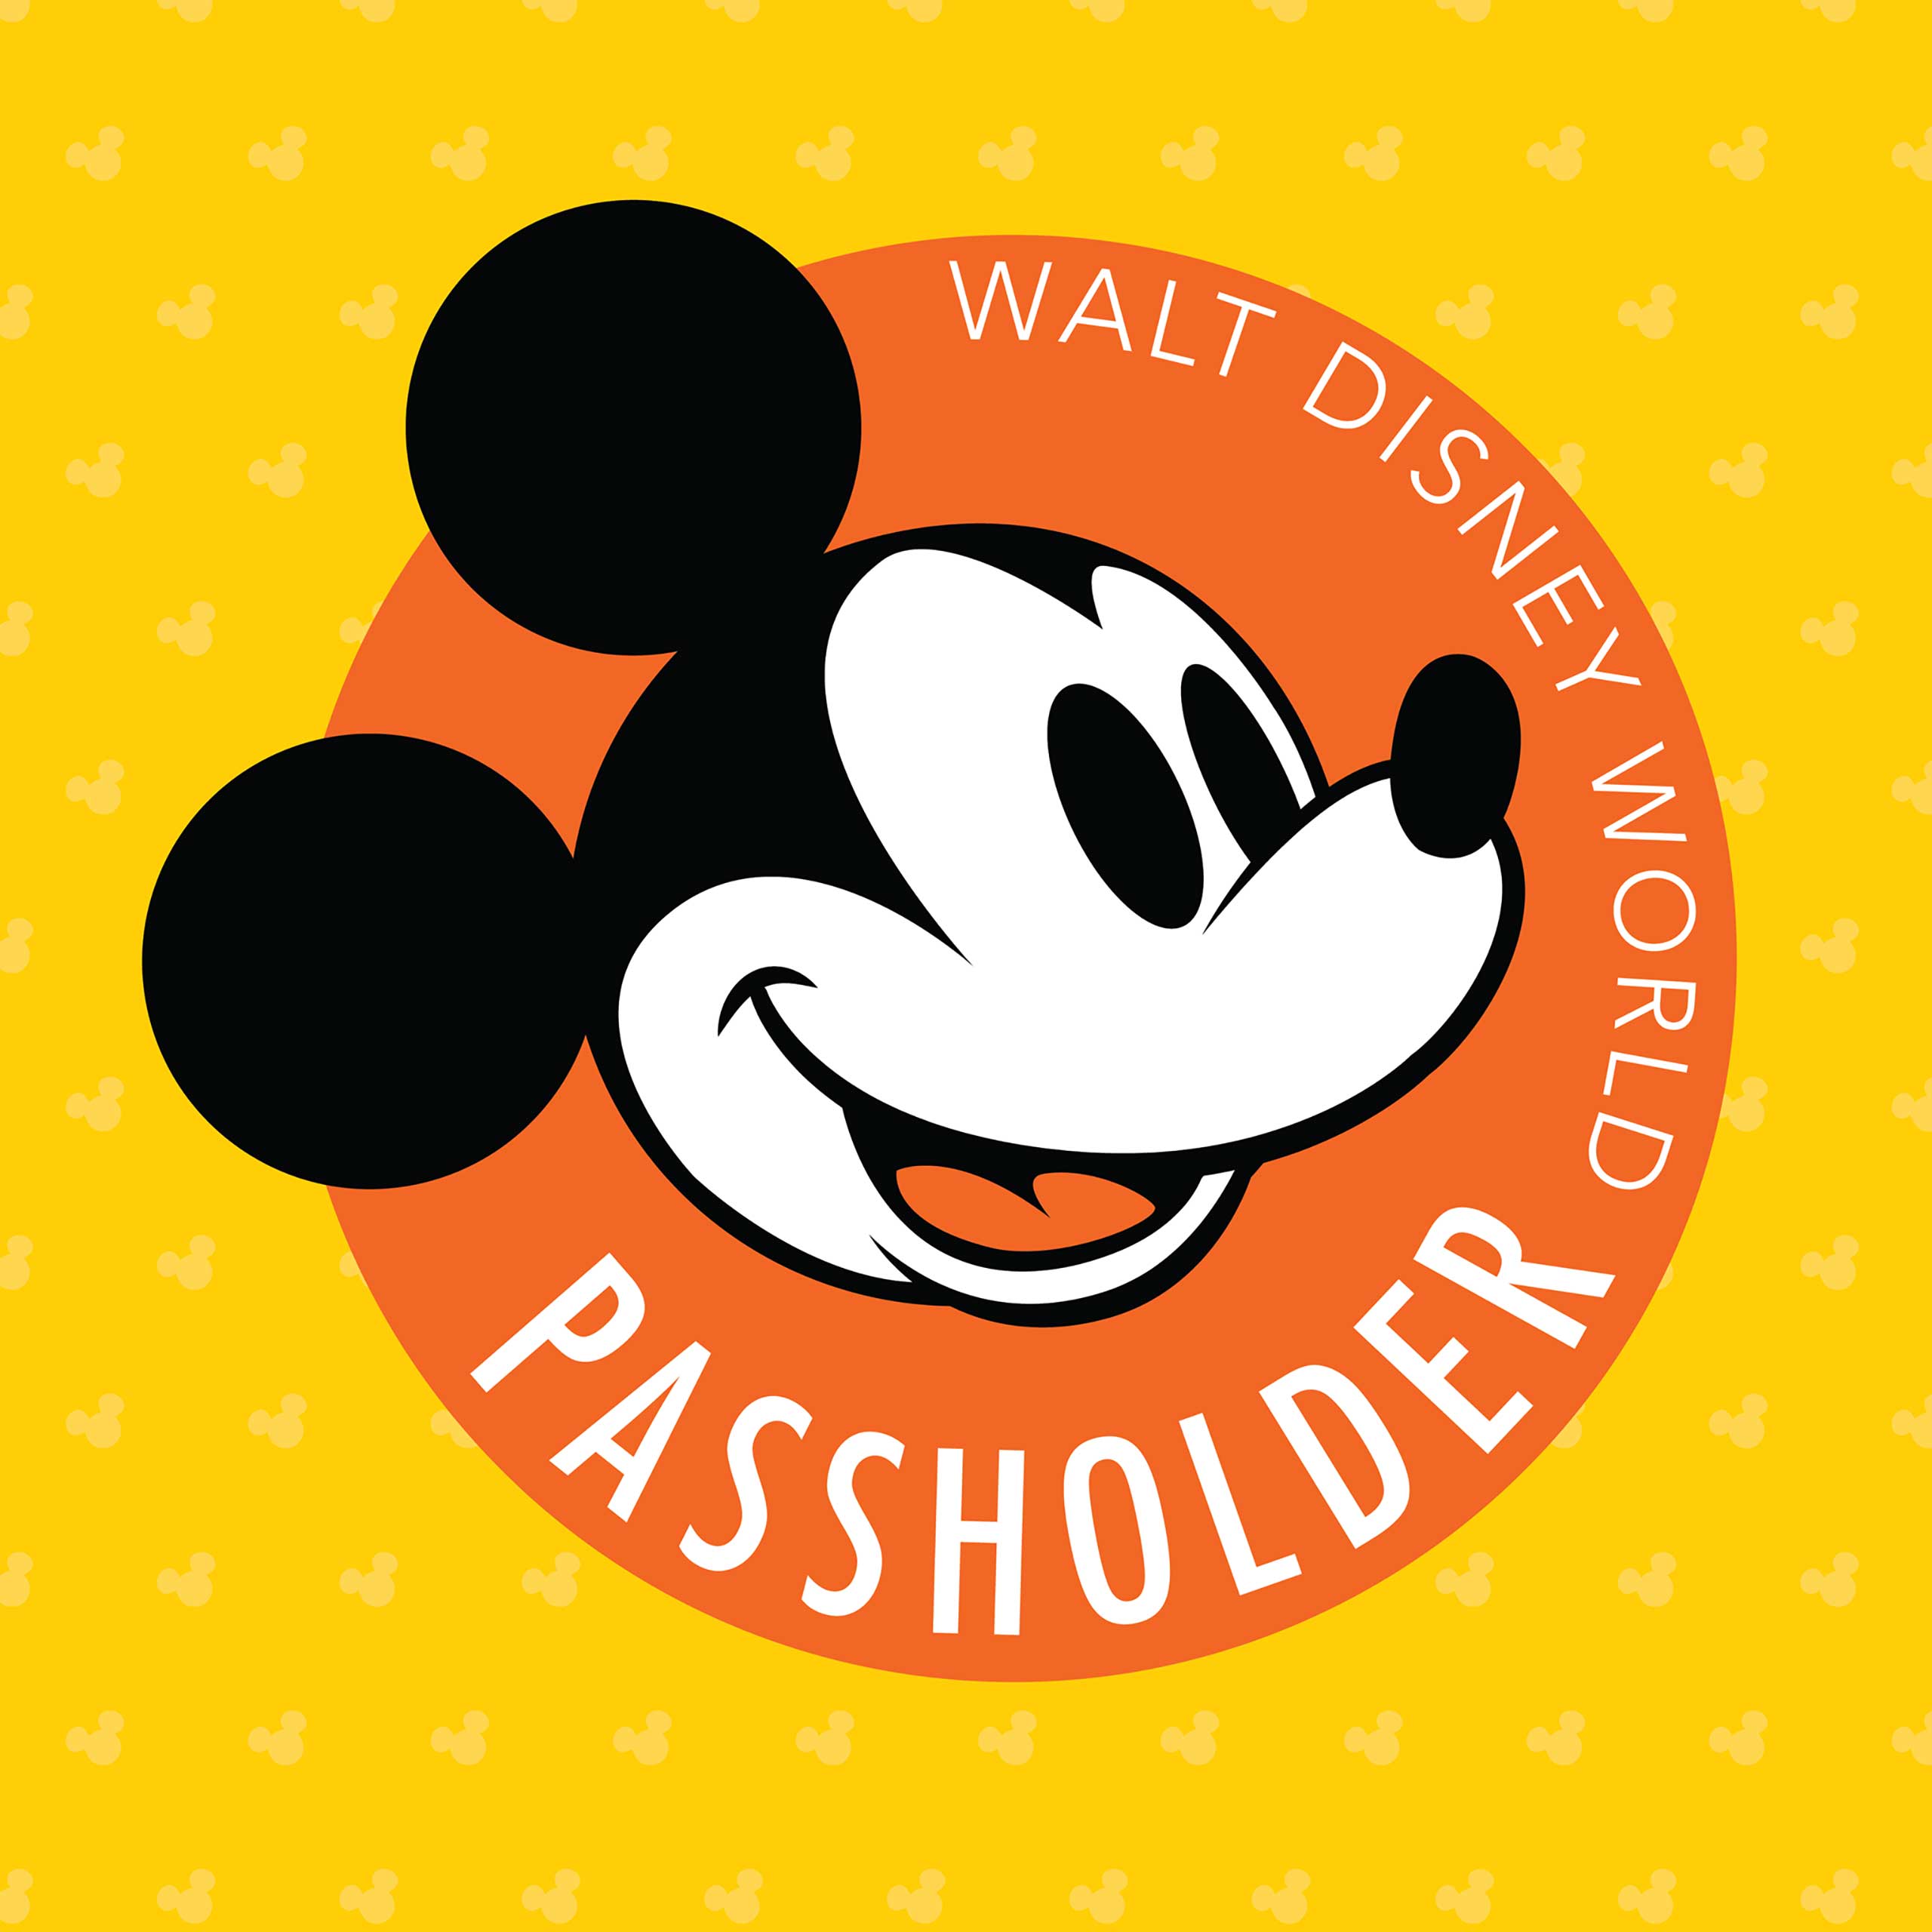 Annual Passholders and DVC members can now get 30 percent merchandise discount at Walt Disney World